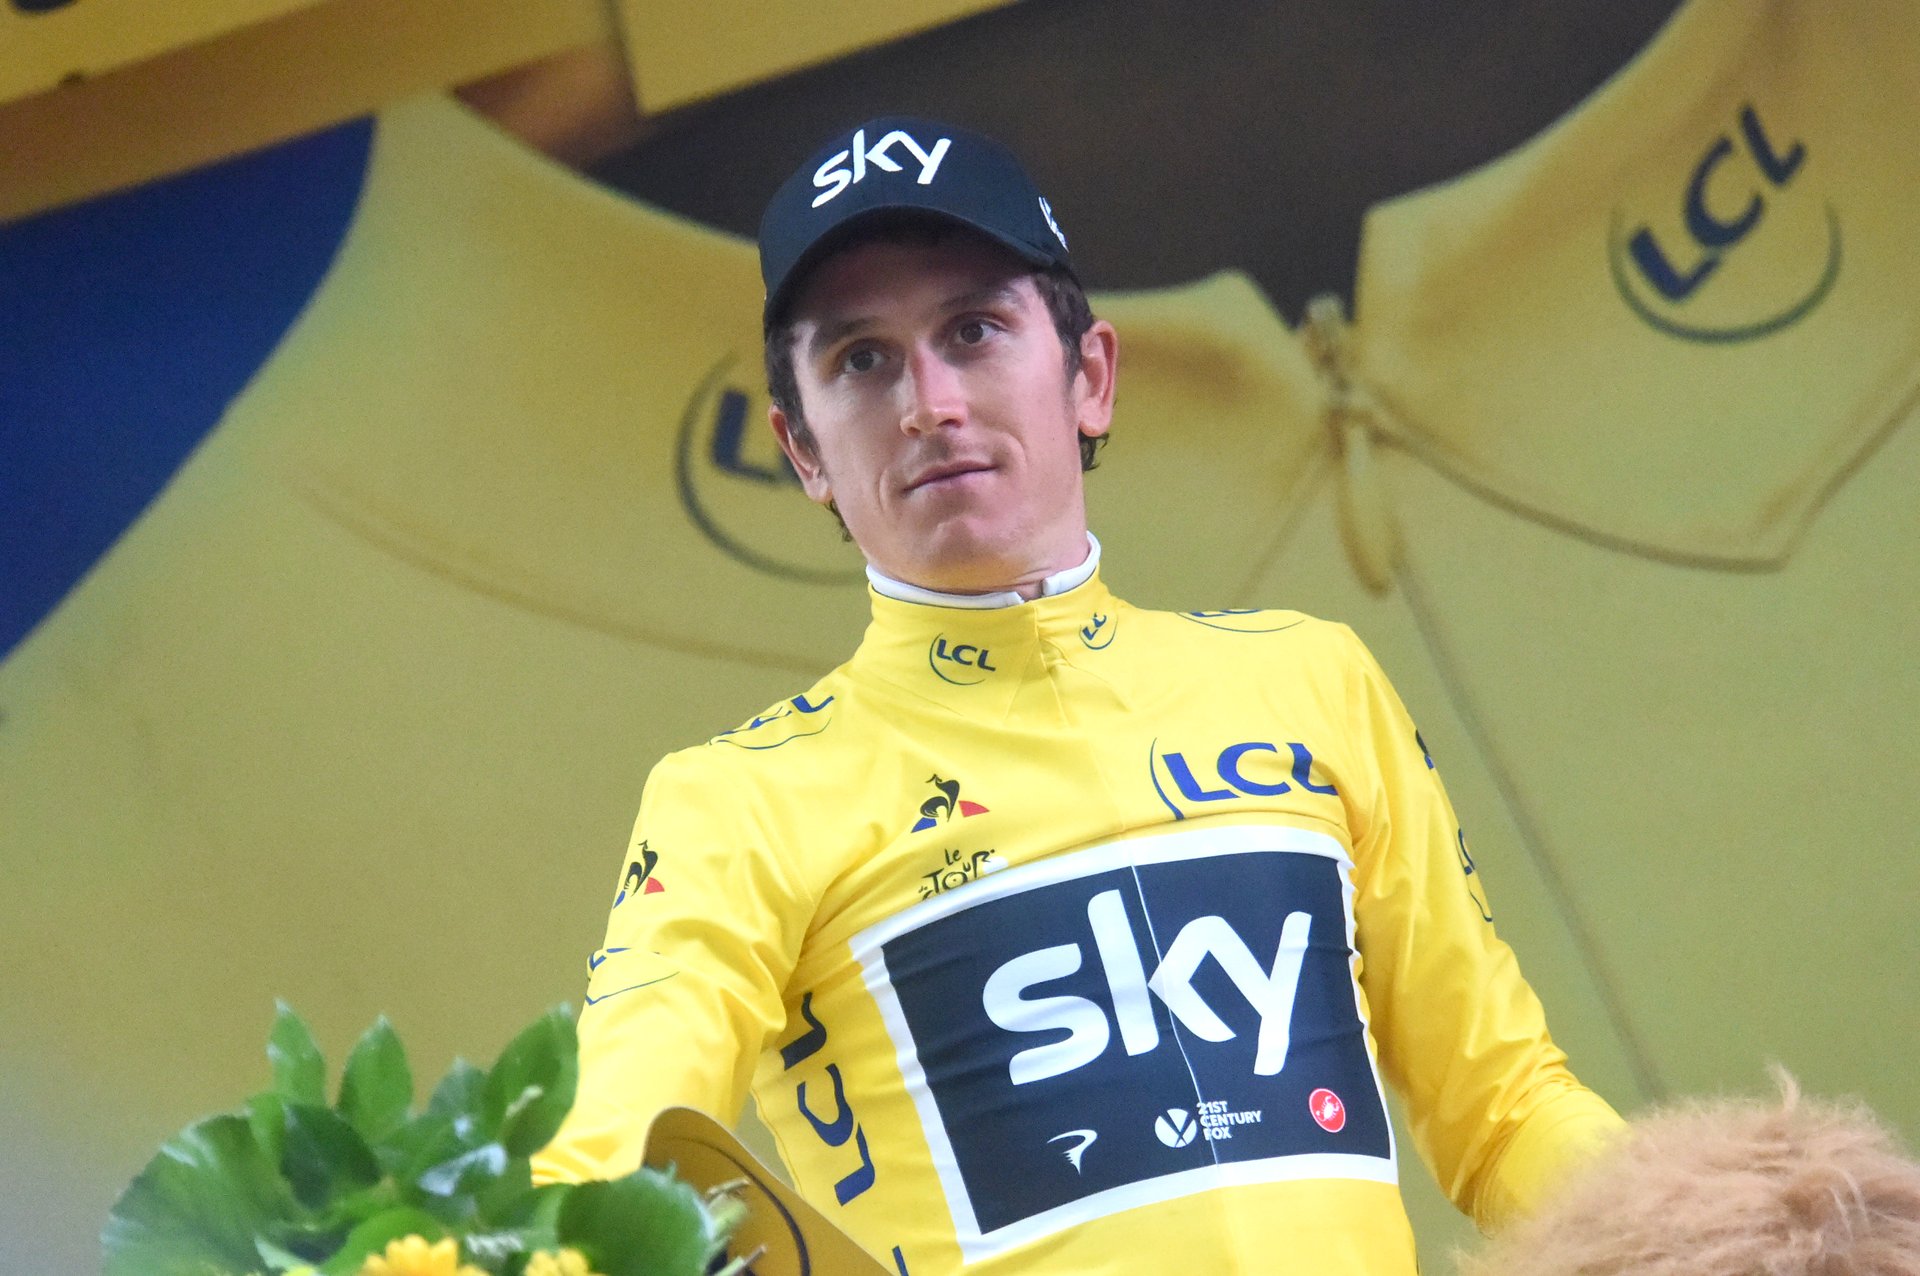 Tour de France 2017 stage one time trial, Geraint Thomas, yellow jersey (Pic: Sirotti)